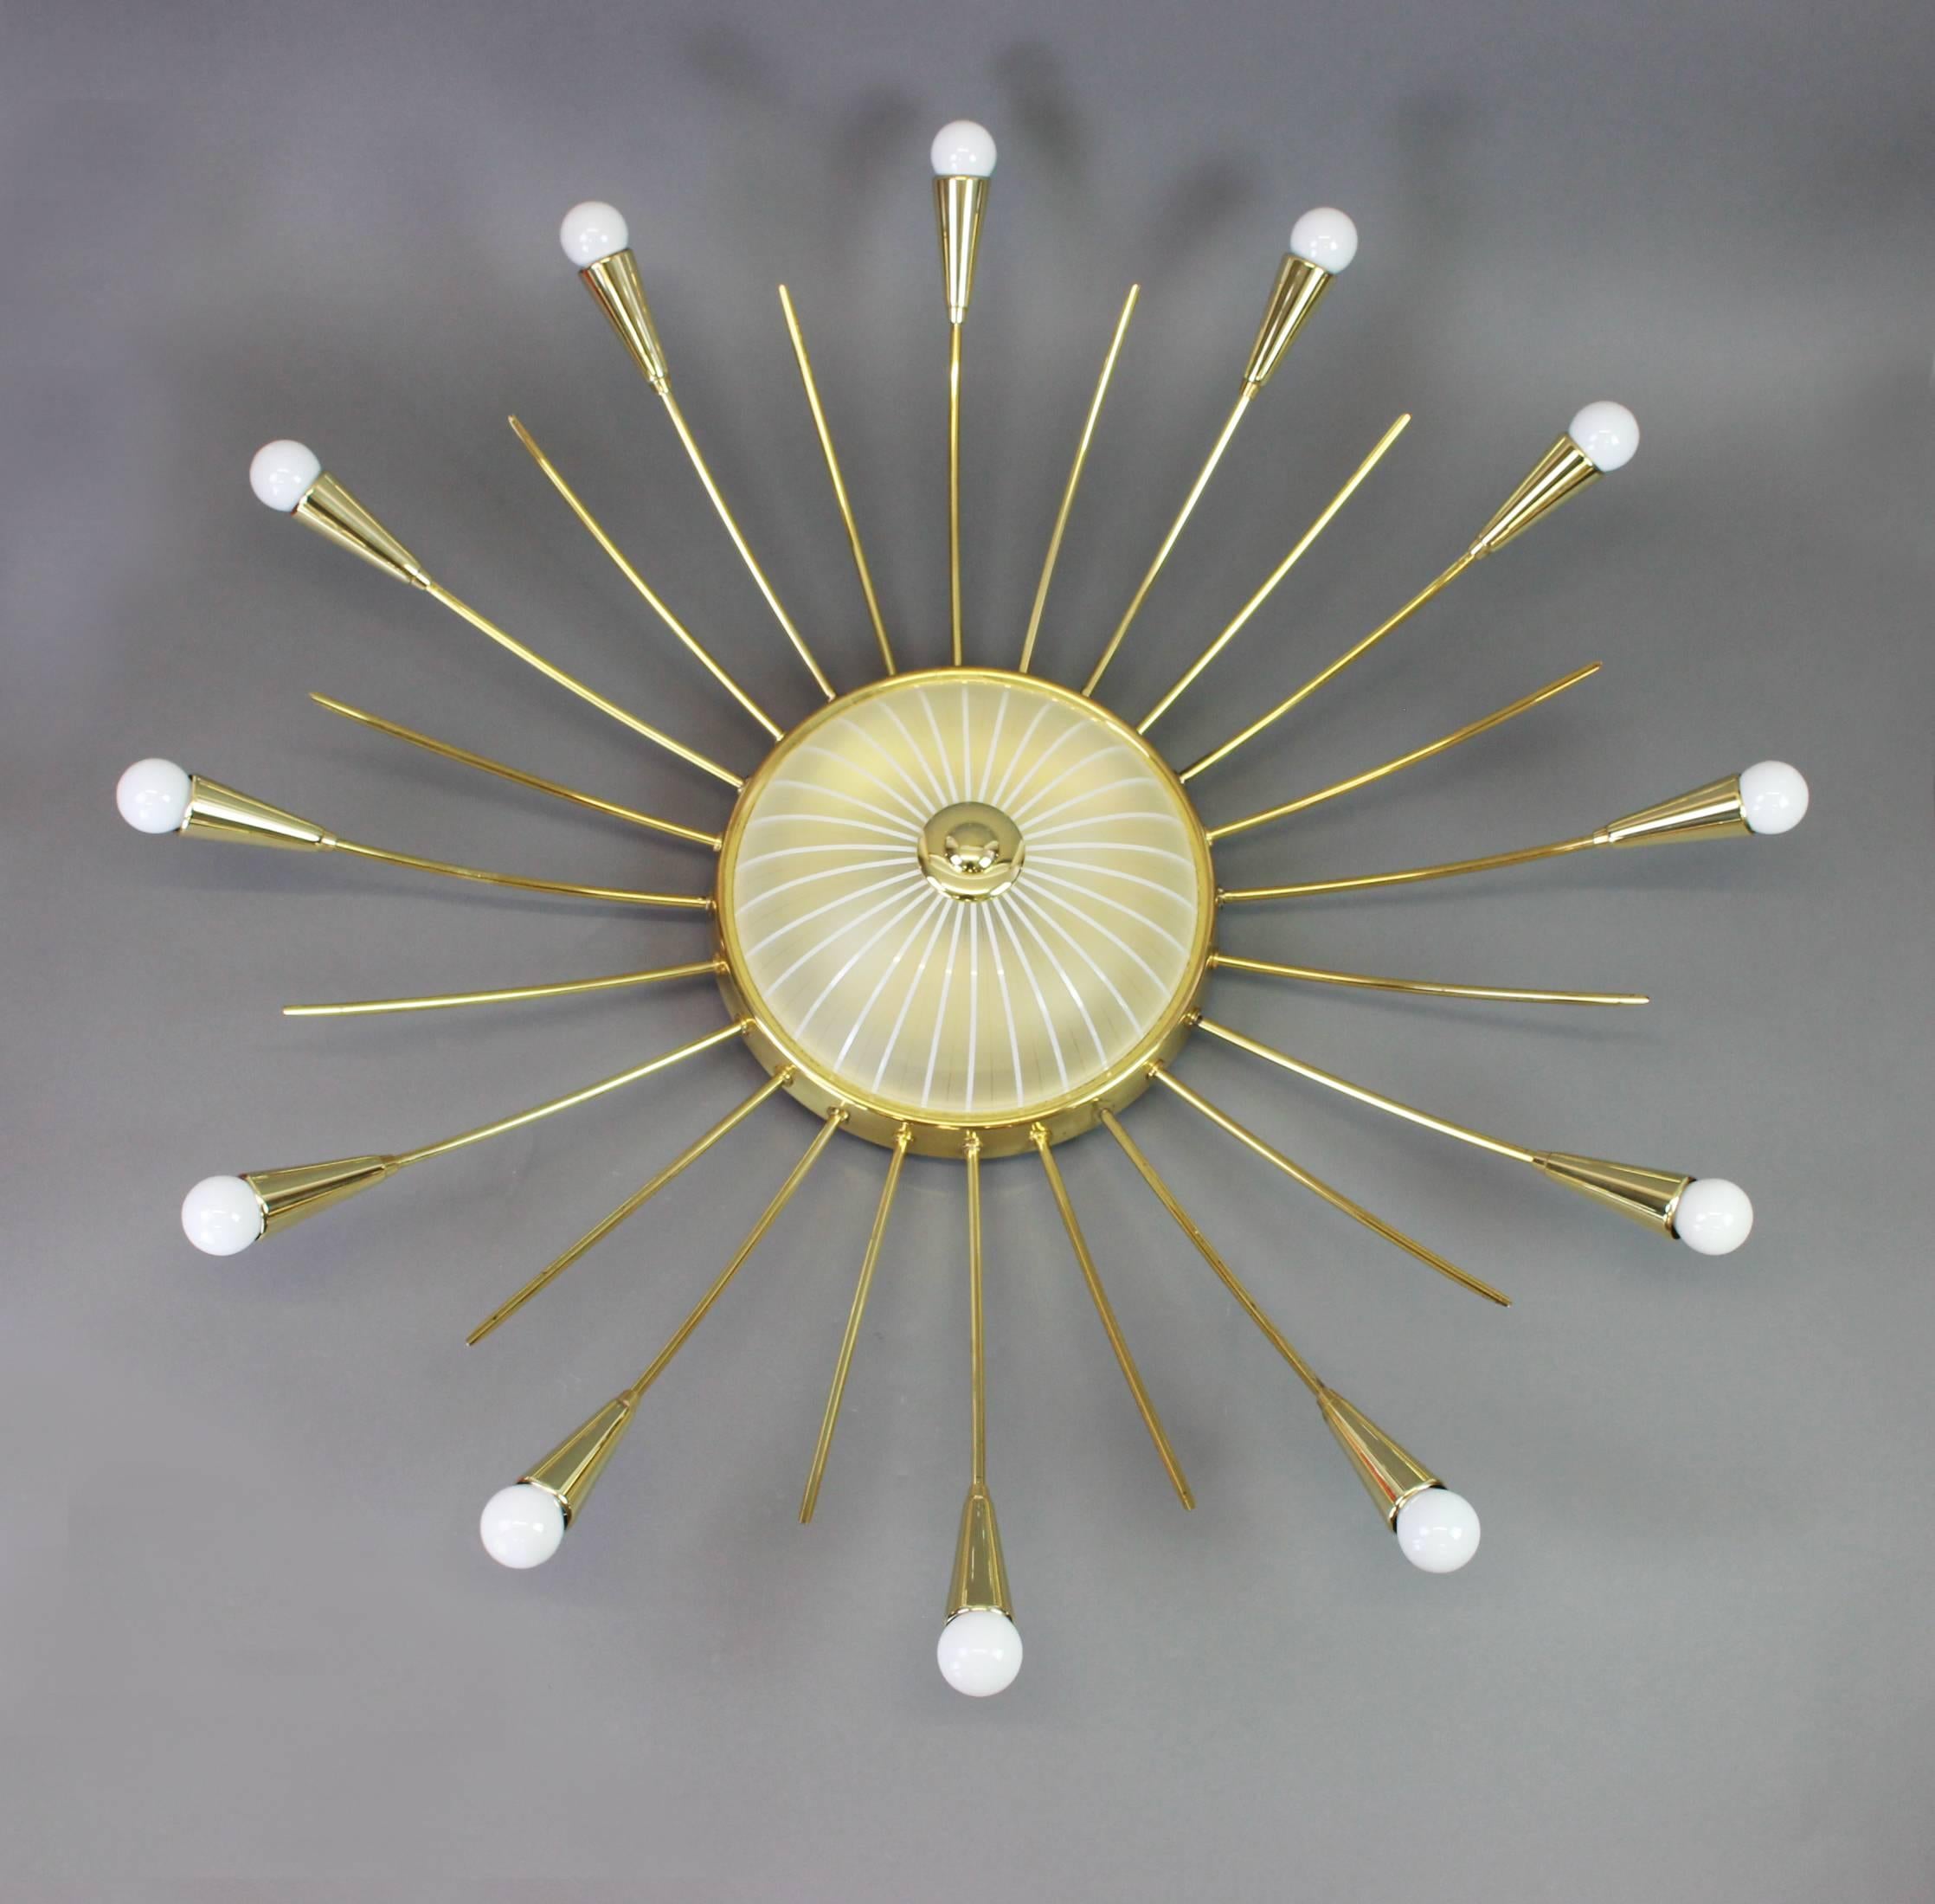 Stunning midcentury sunburst chandelier, in Stilnovo style made in the 1950s.
Very elegant and rare version with illuminated center under a frosted glass dome.

High quality and in very good condition. Cleaned, well-wired and ready to use.

The